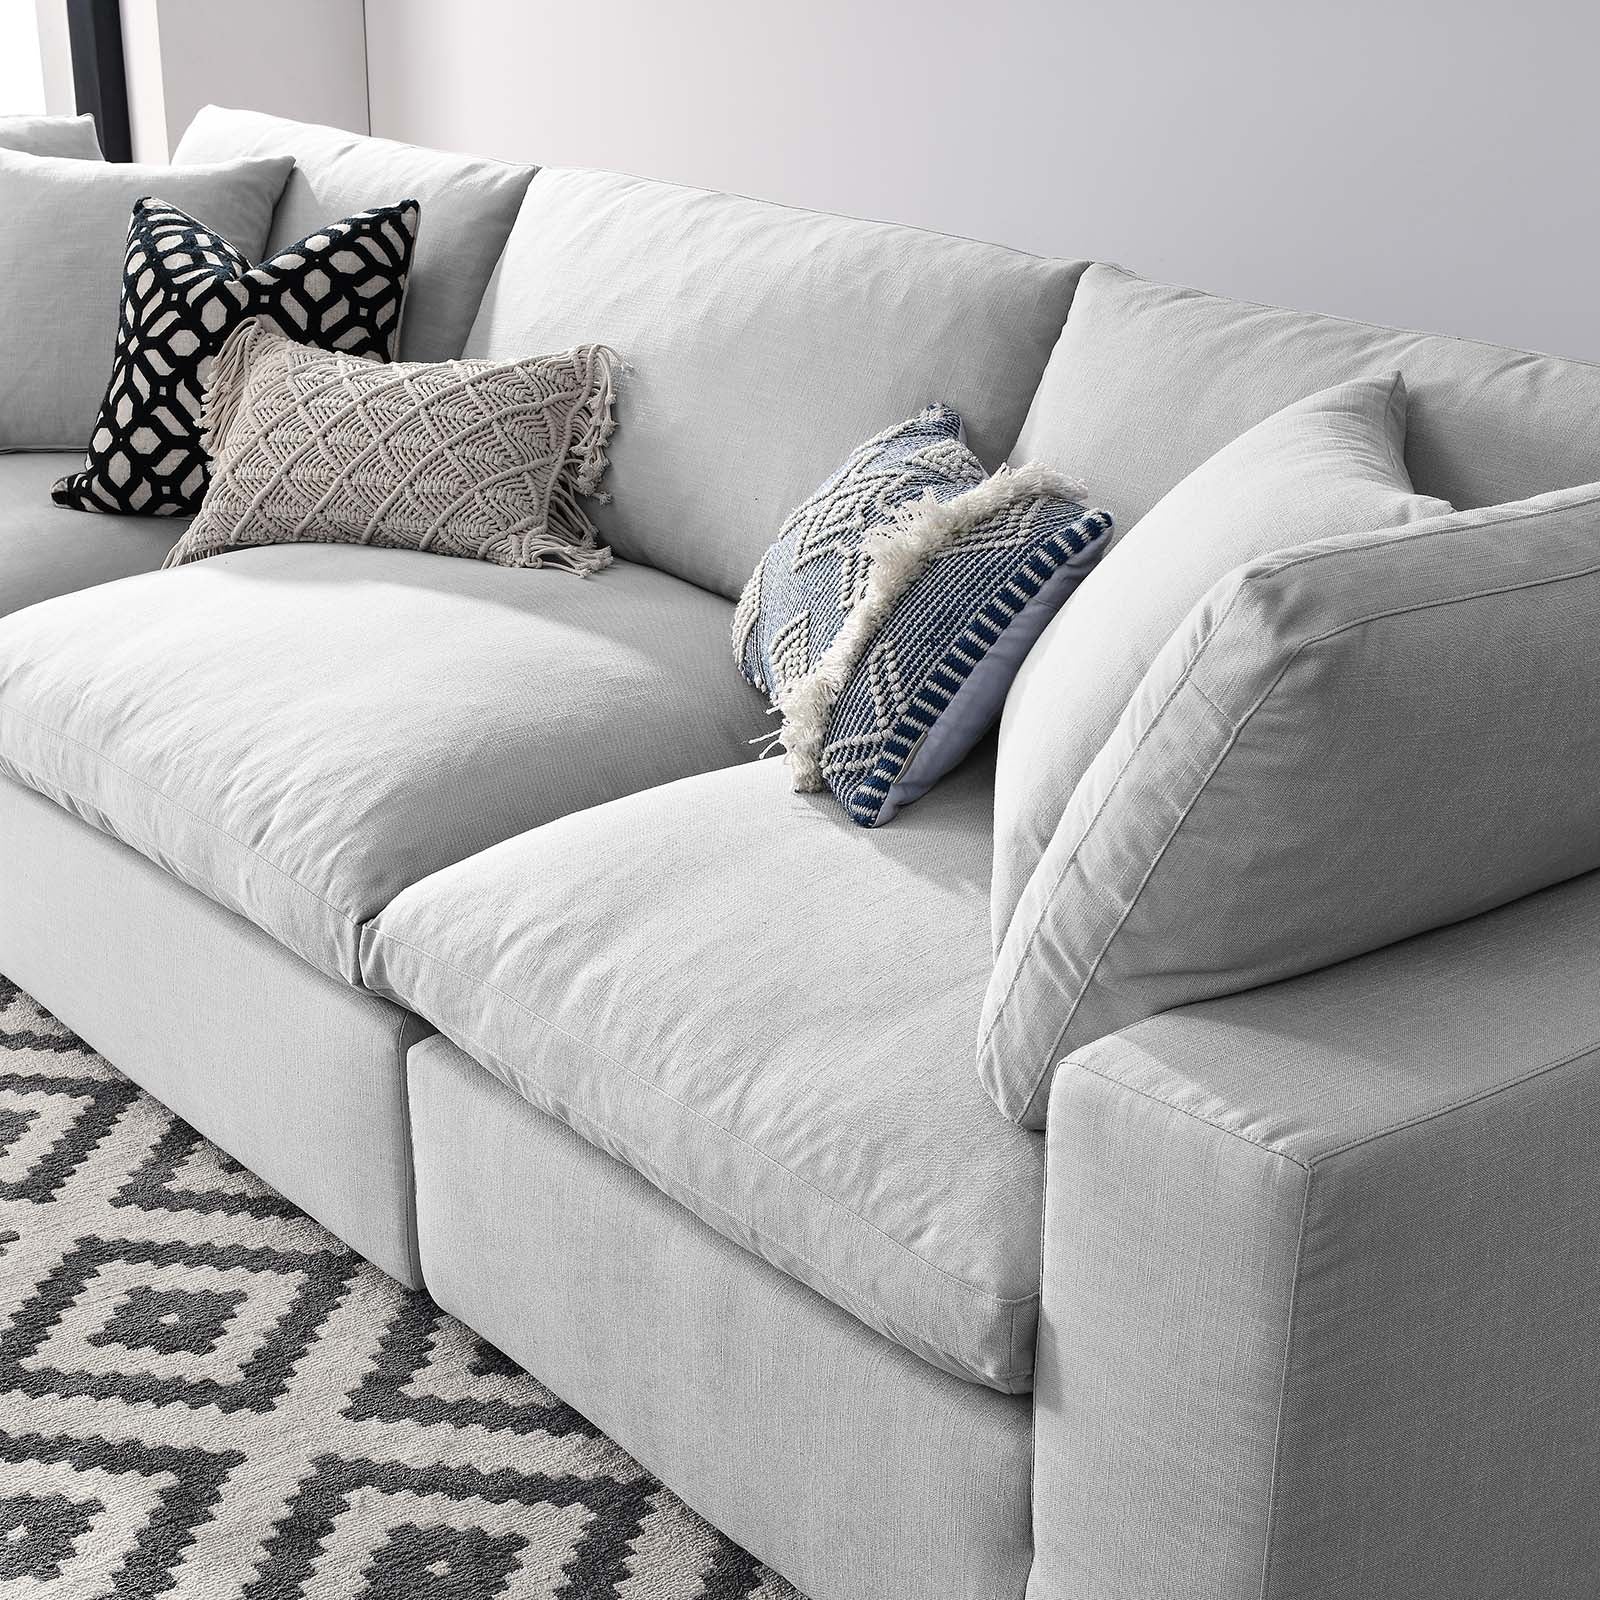 Sofa with 7 comfy Pillows, Light Gray and Black